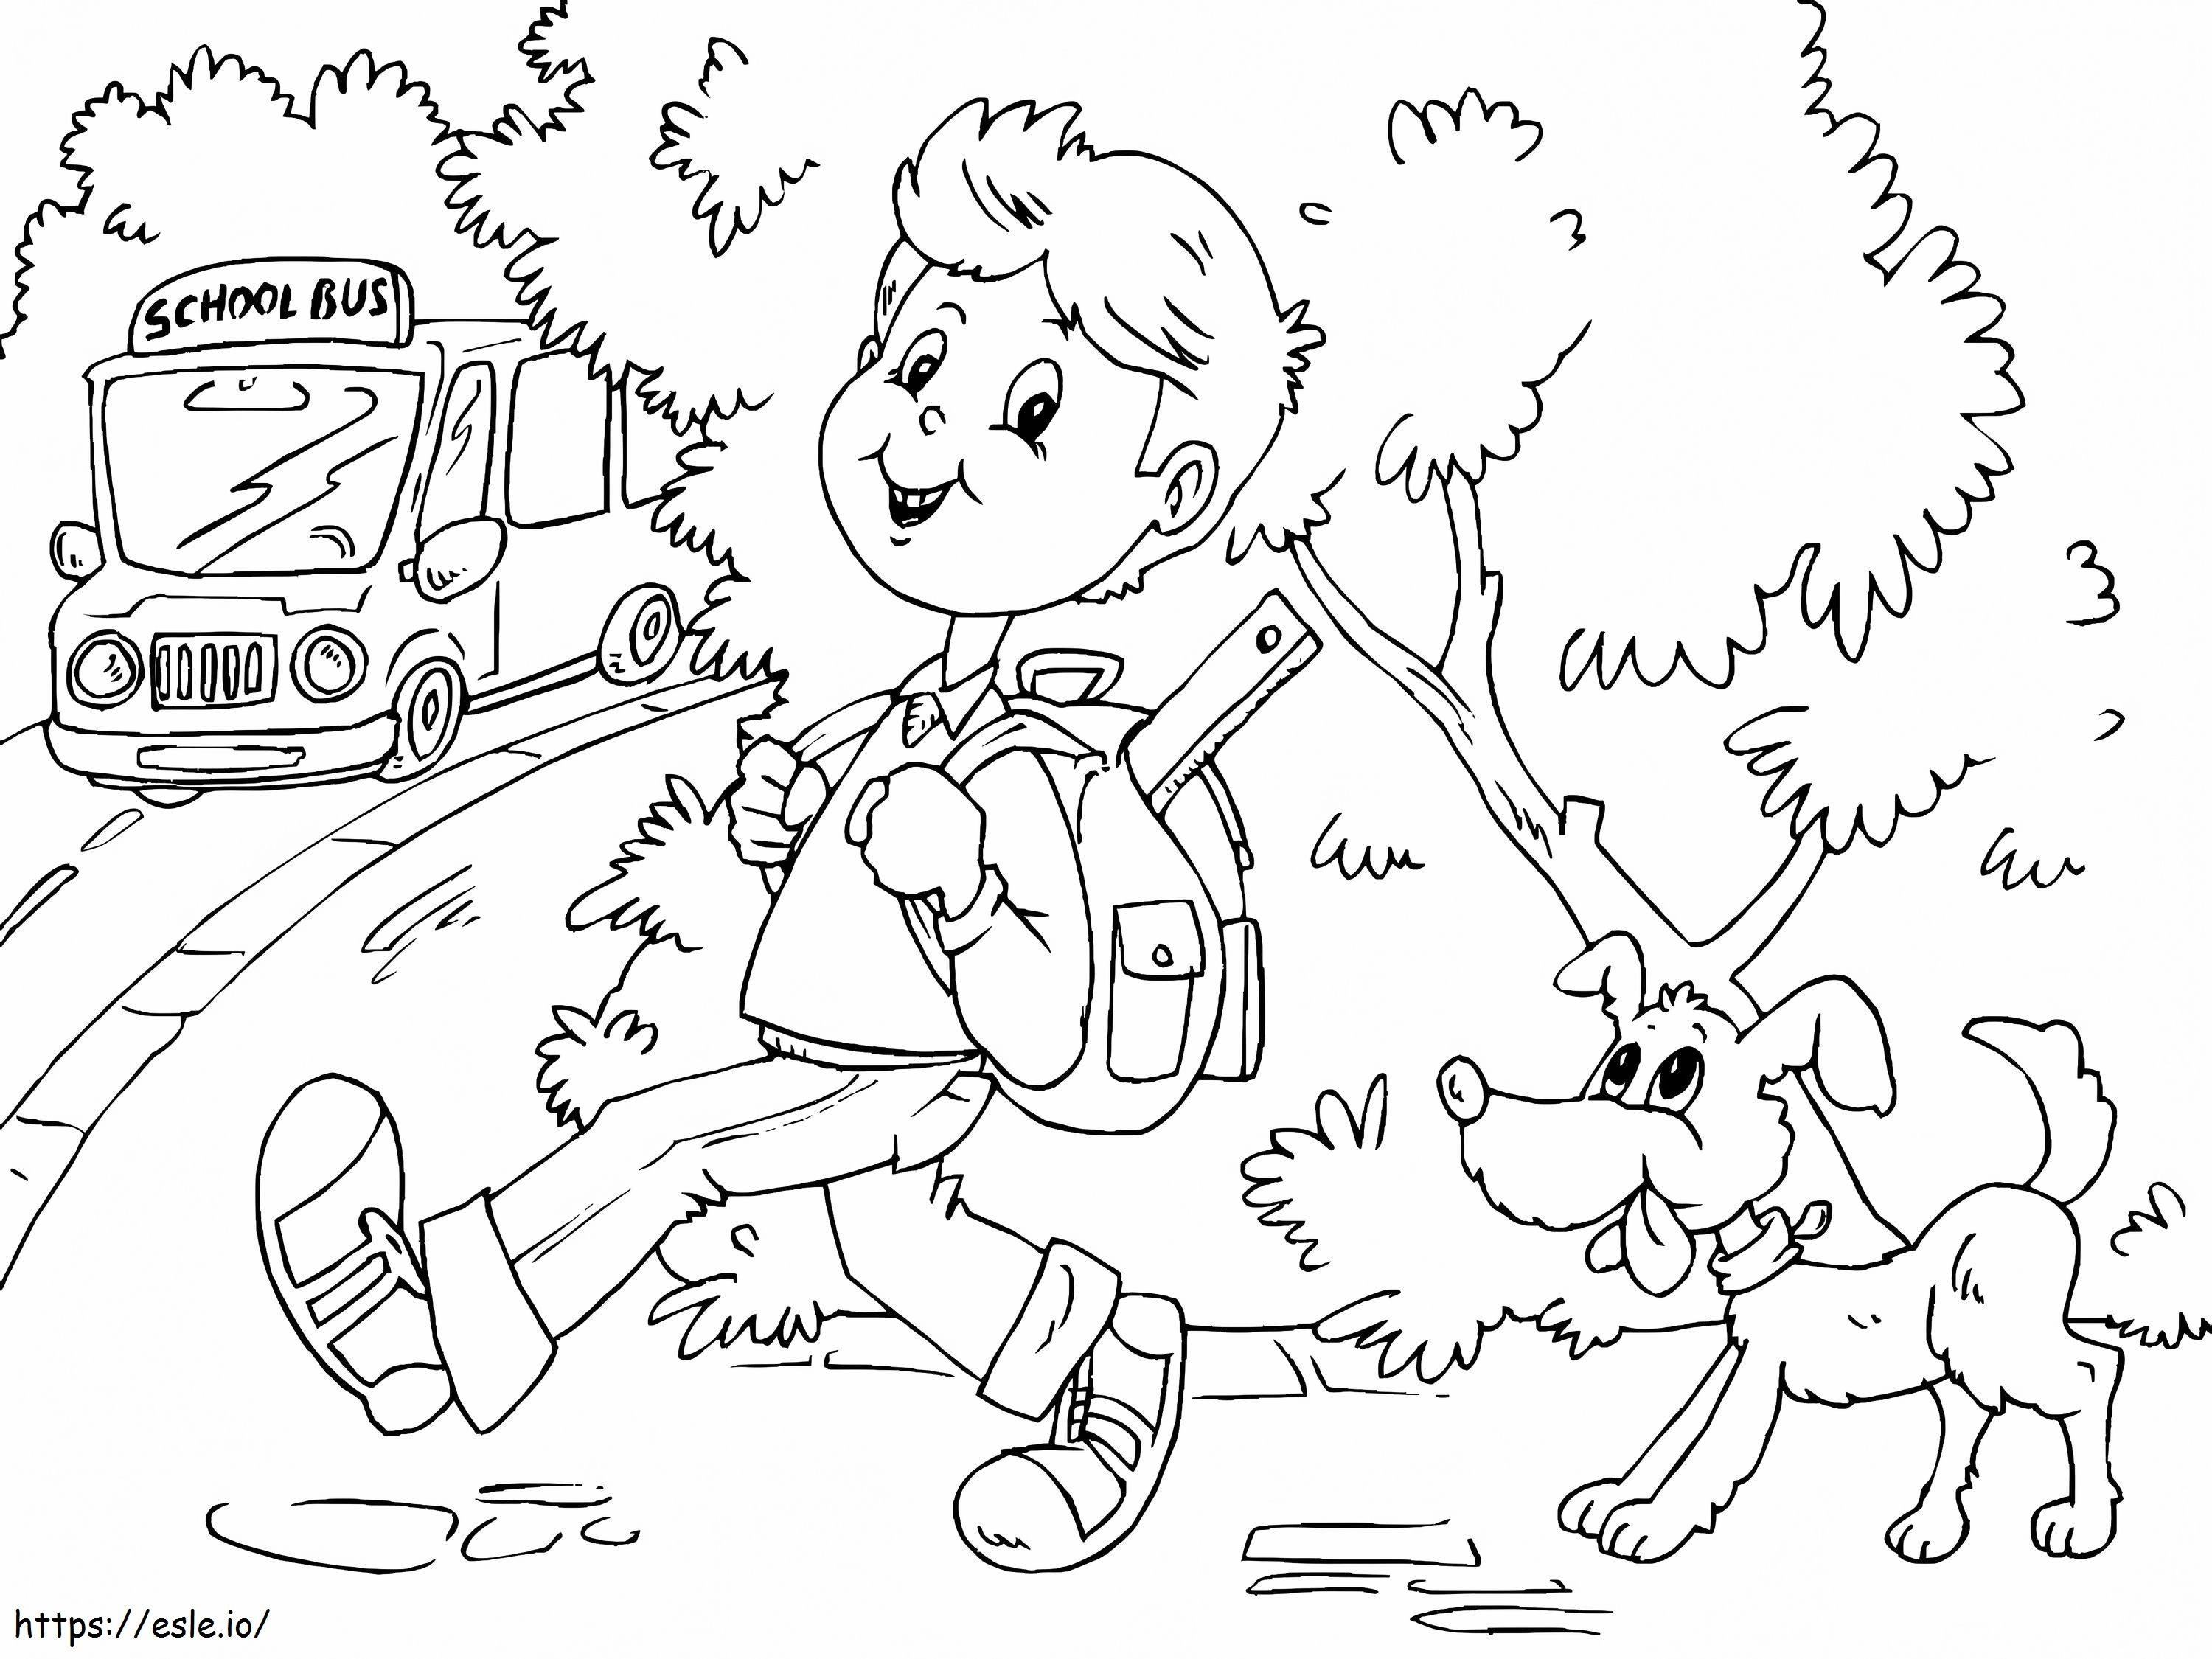 Catchtheschoolbusa4 coloring page